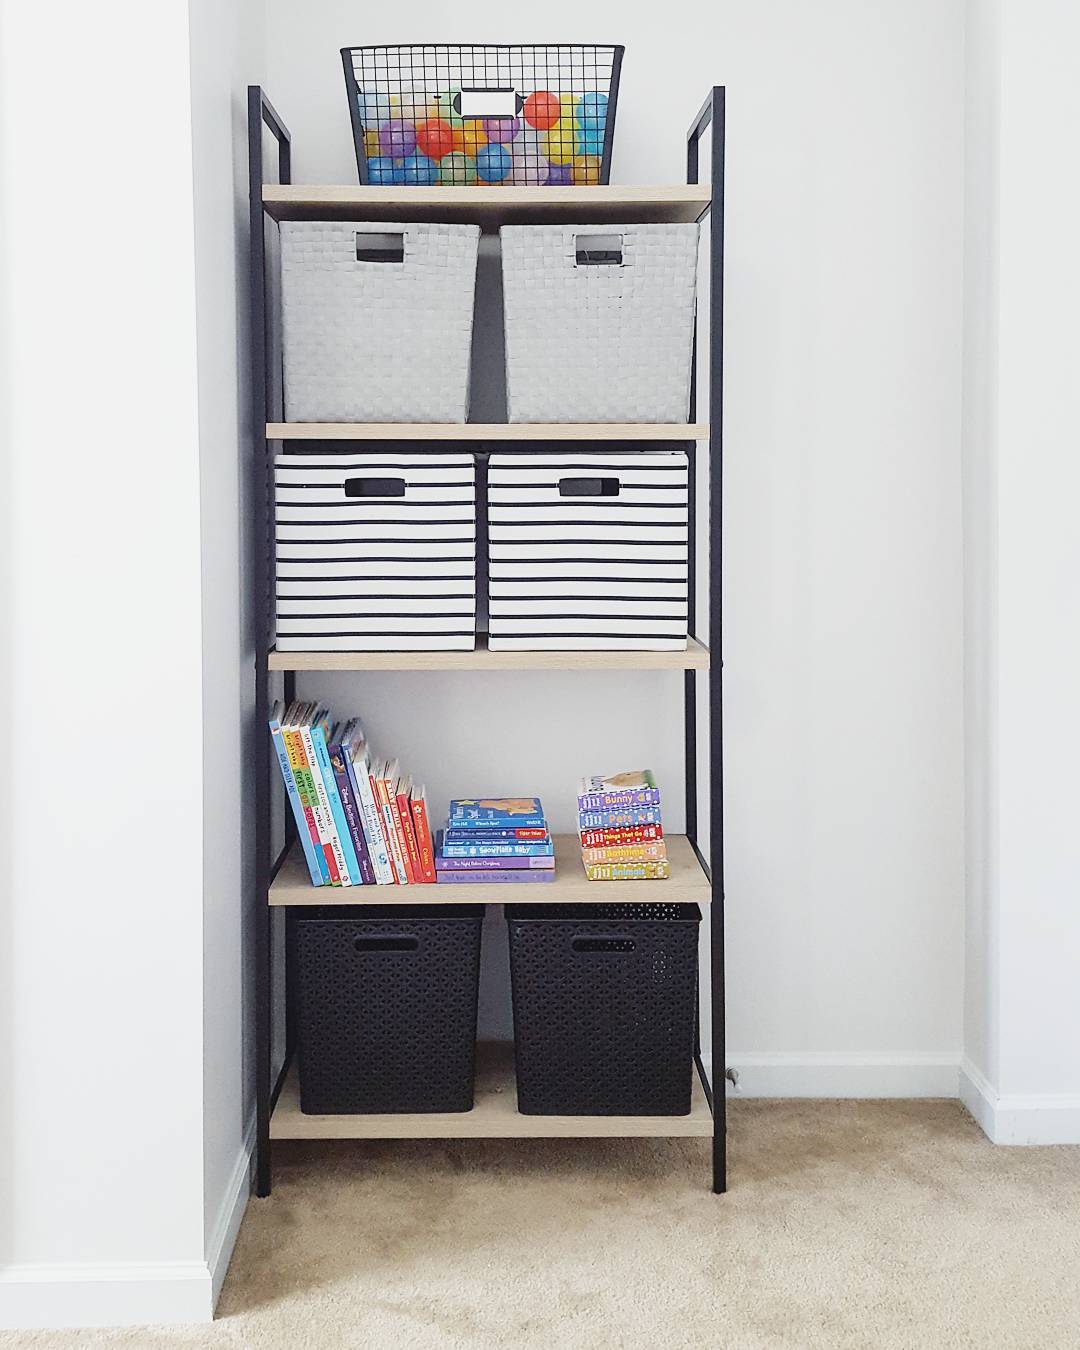 Kids Bookshelf with Bins Storing Toys and Books. Photo by Instagram user @melissasabra